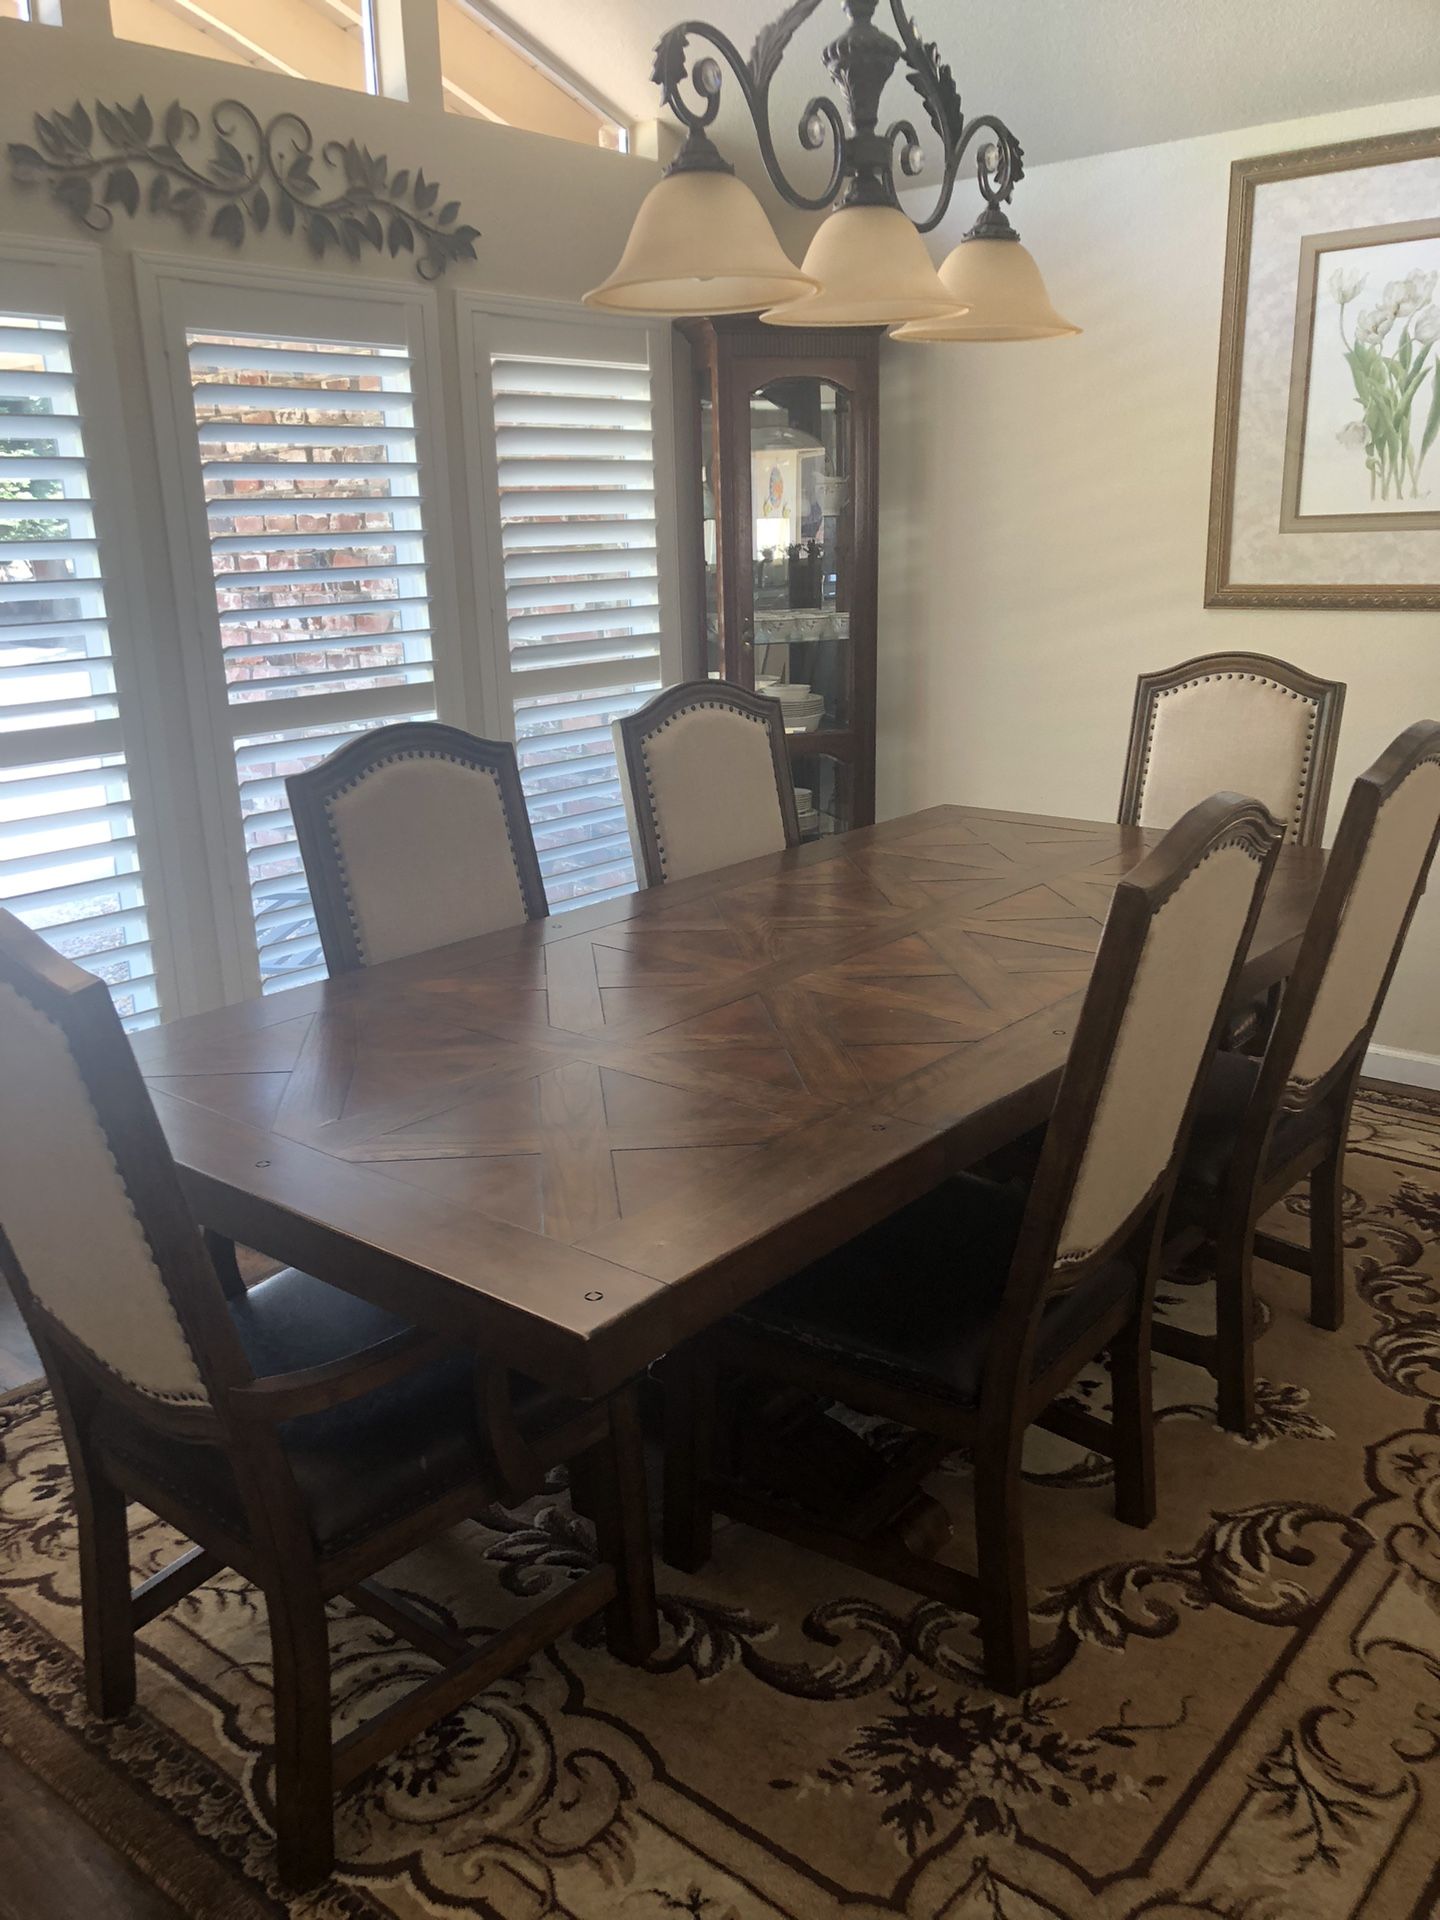 Walnut Dining Room Table w/ 6 Chairs